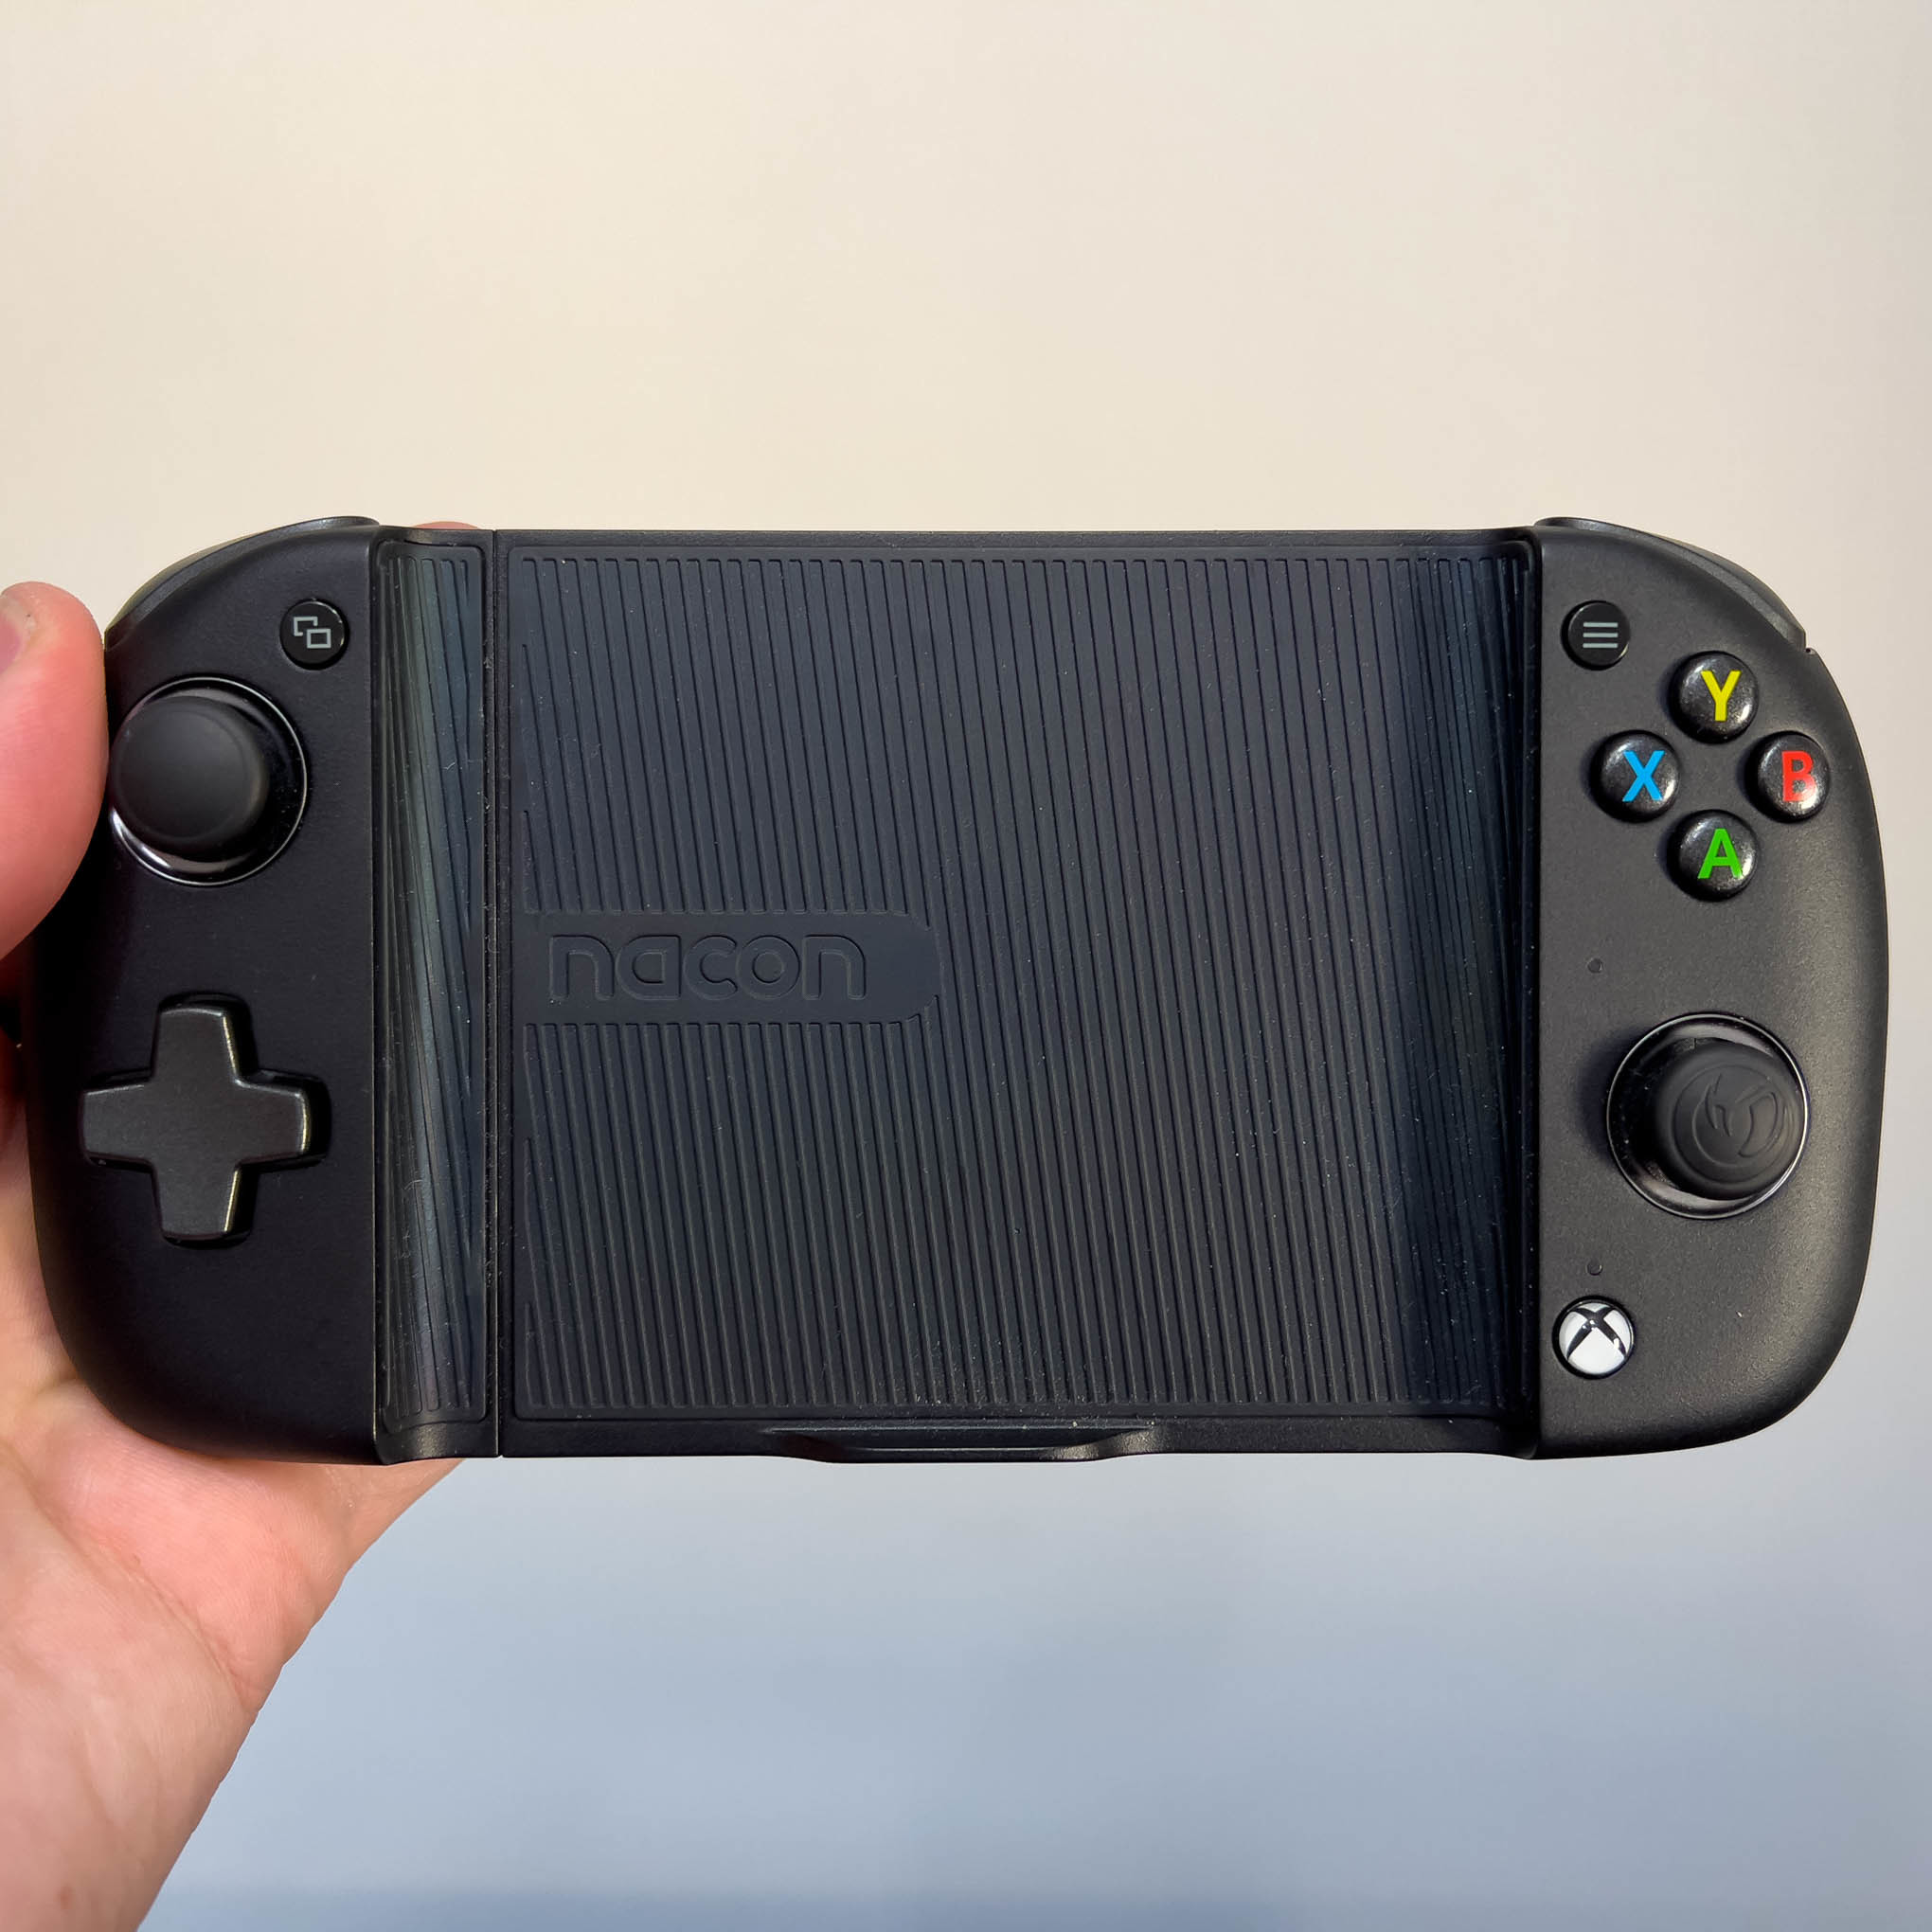 Cenagal Motear demasiado This controller turns your Android phone into a portable Xbox - The Verge